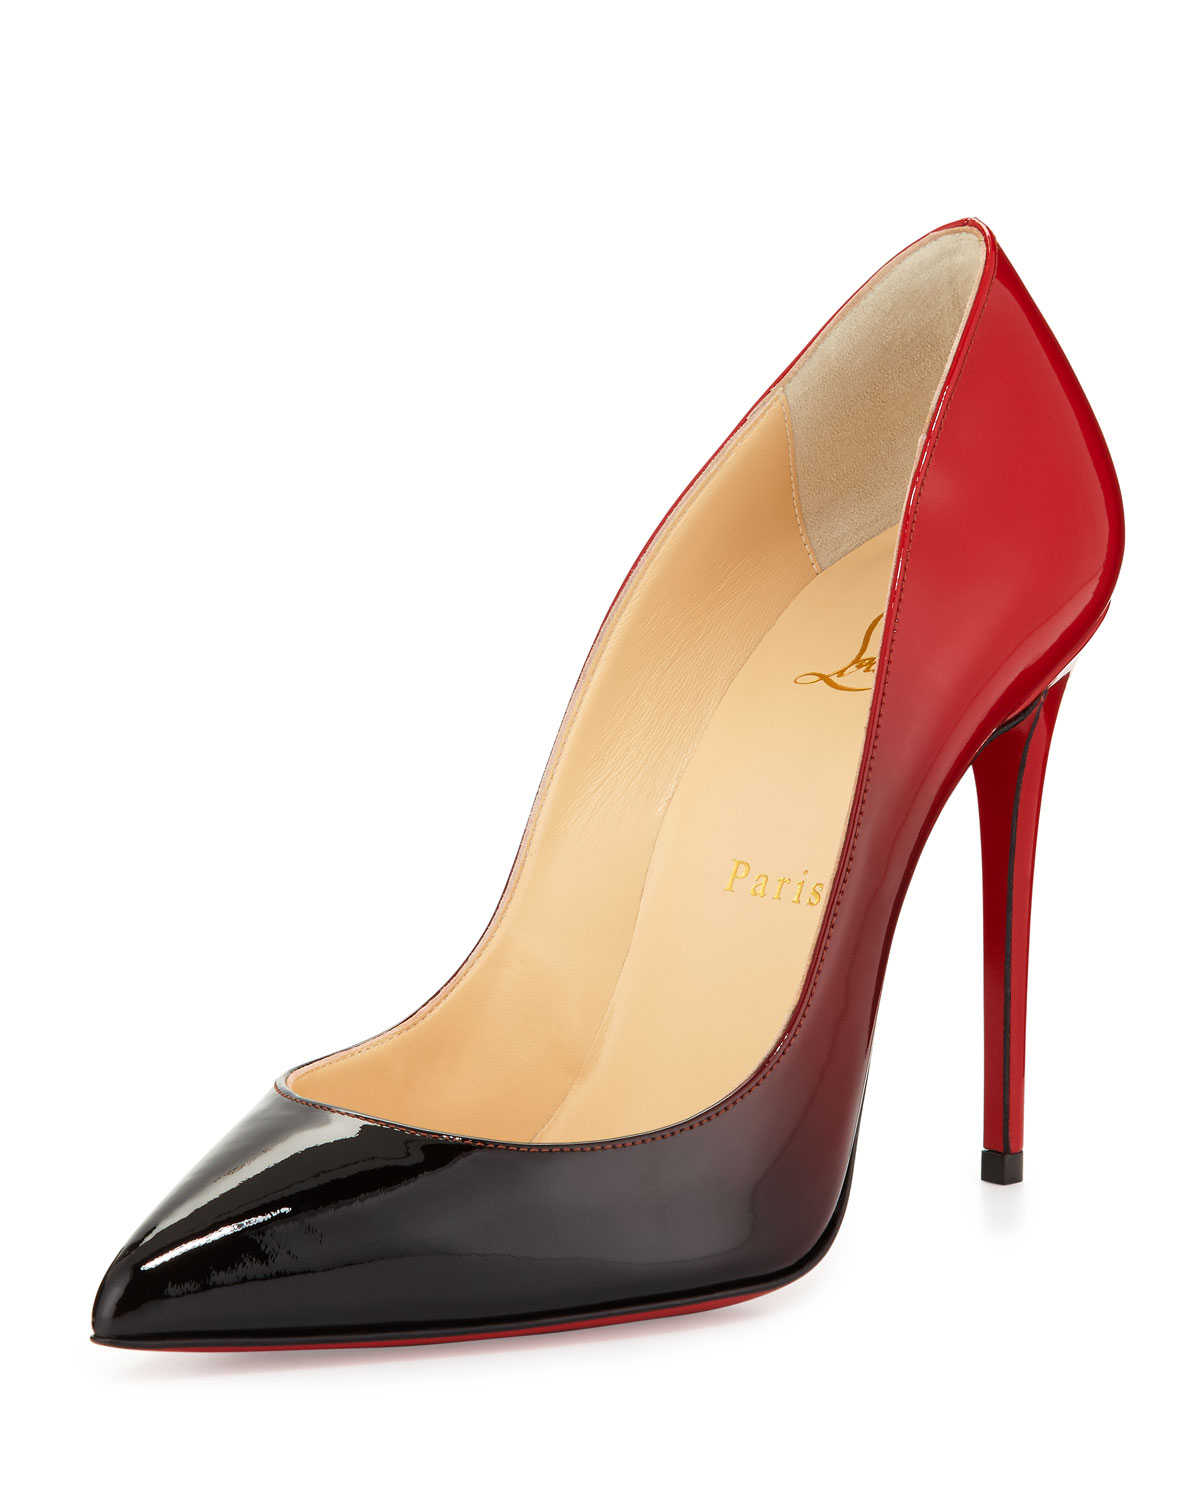 Christian louboutin Pigalle Follies Degrade Red Sole Pump in Black | Lyst